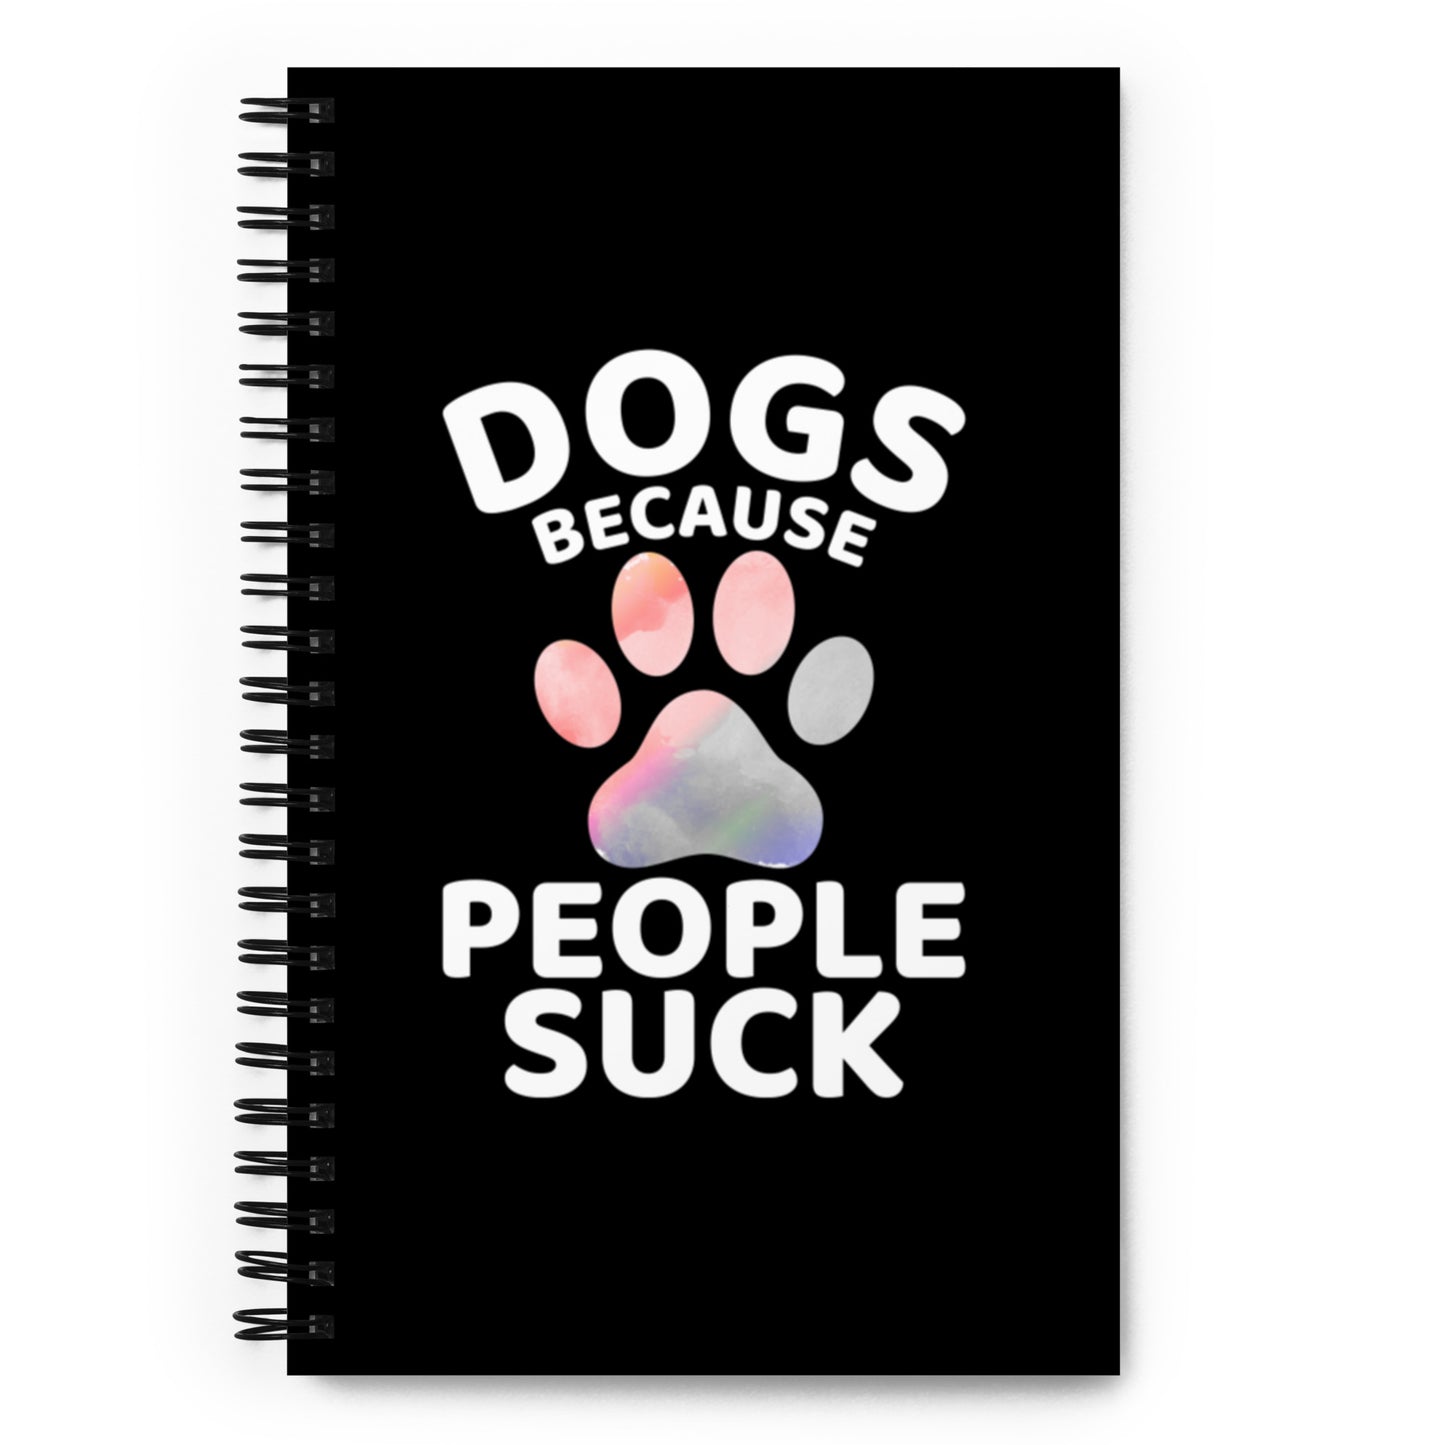 Dogs Because People Suck Spiral notebook